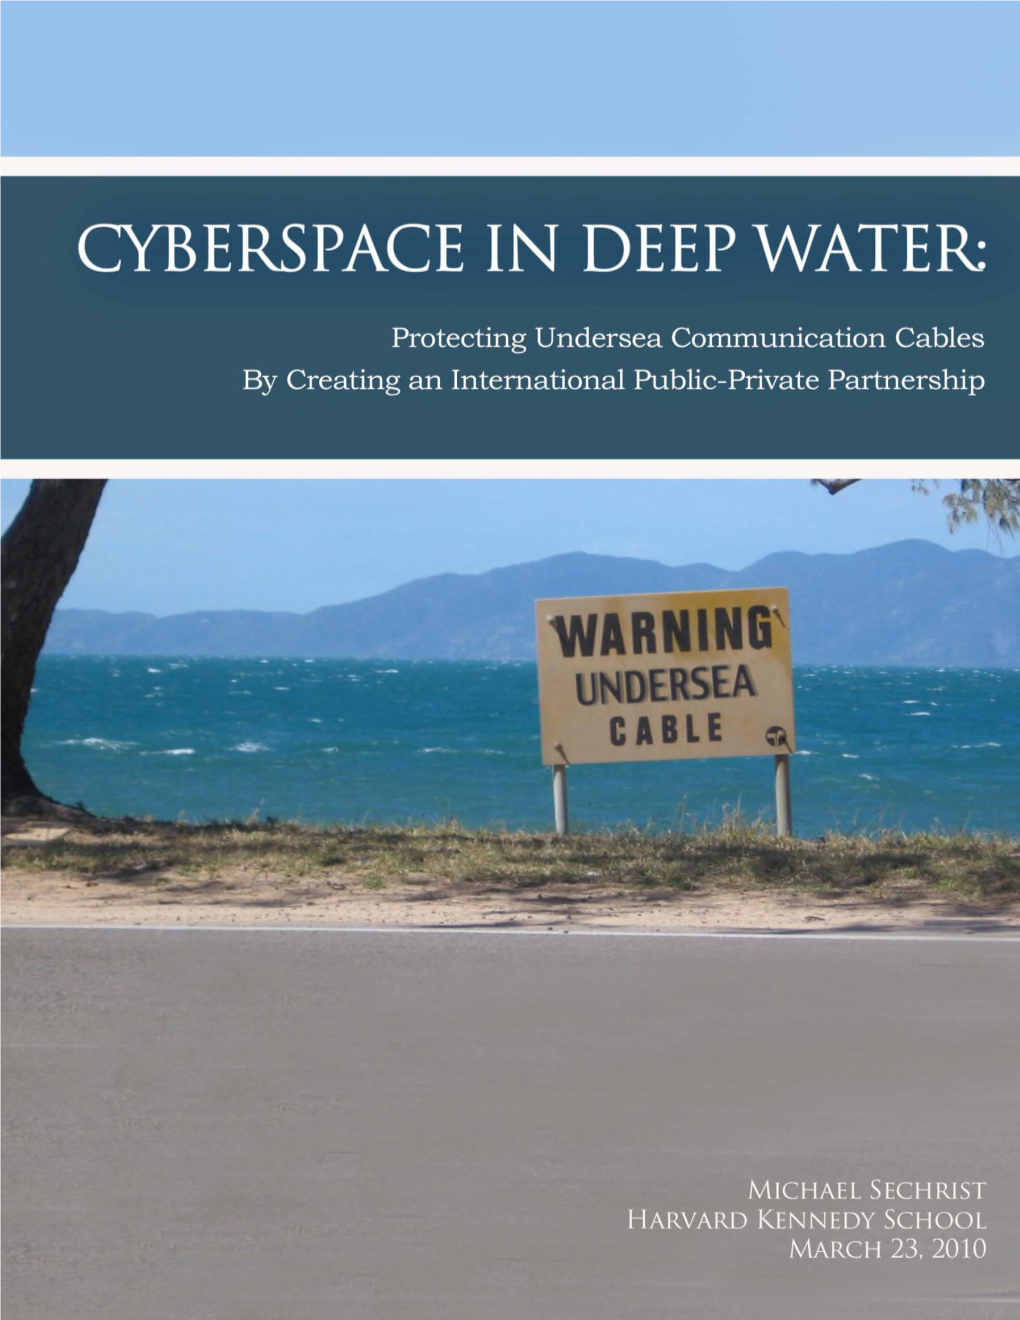 Cyberspace in Deep Water: Protecting Undersea Communication Cables